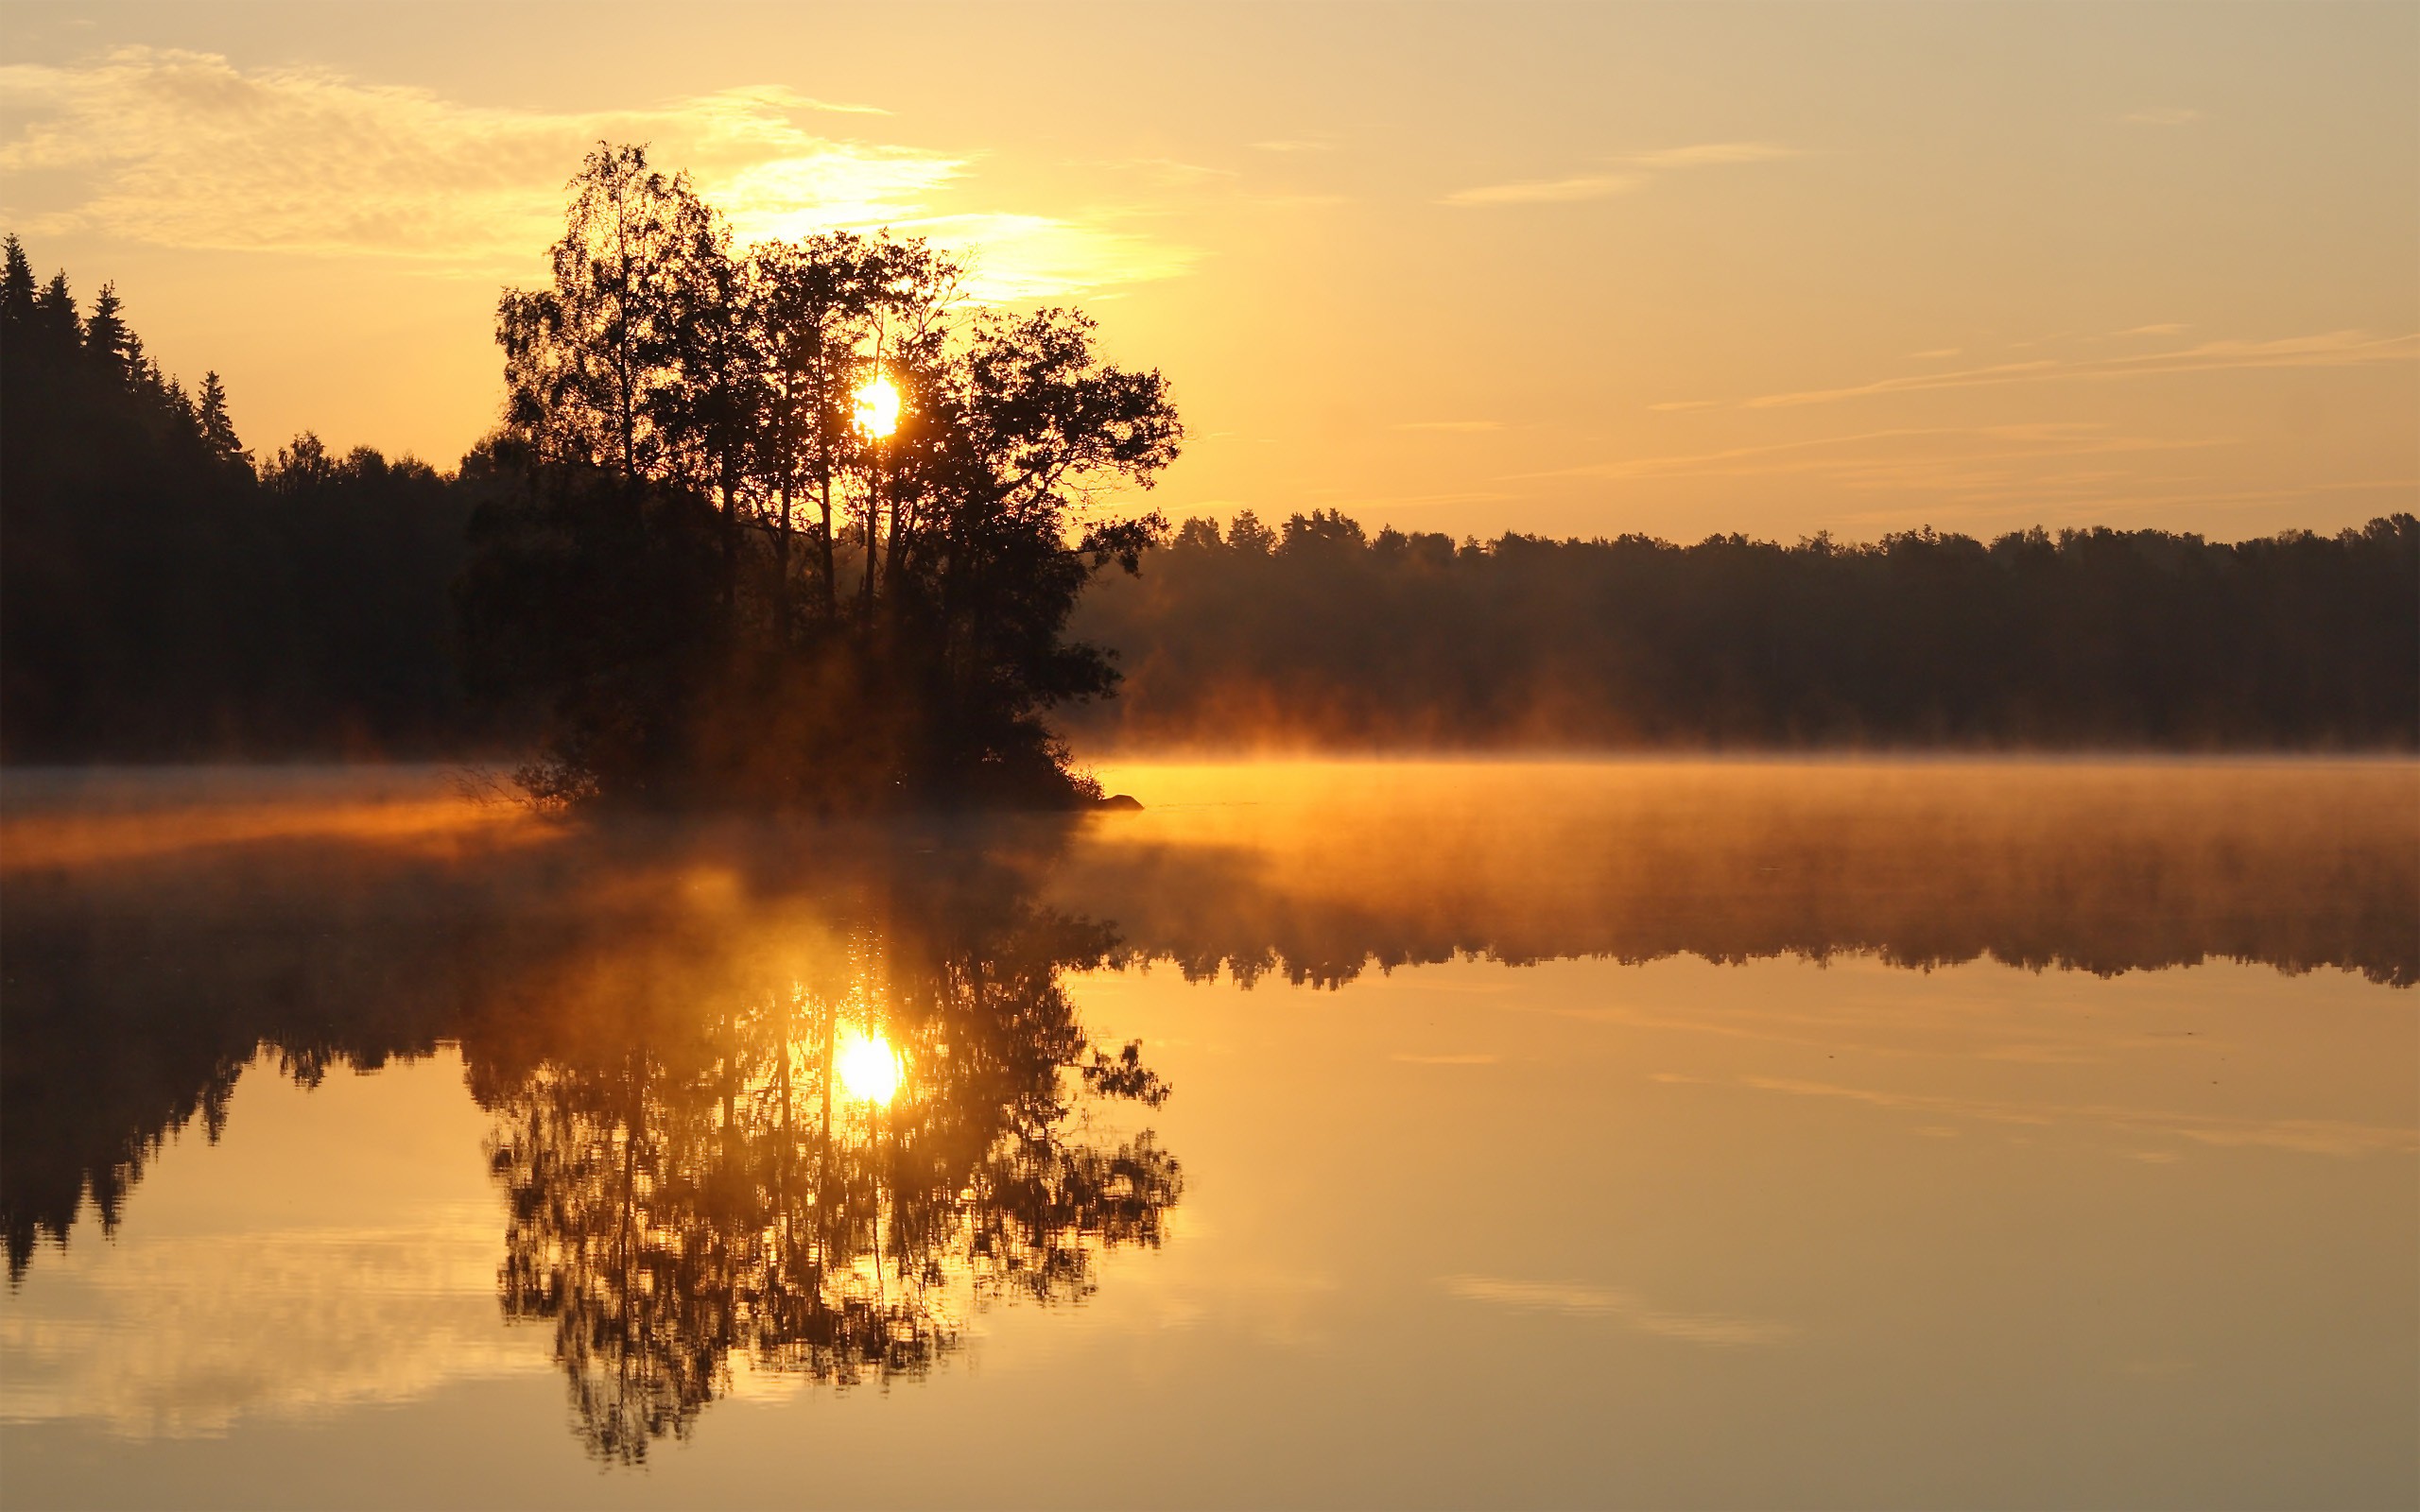 General 2560x1600 trees landscape Sun lake nature reflection sky outdoors calm waters low light